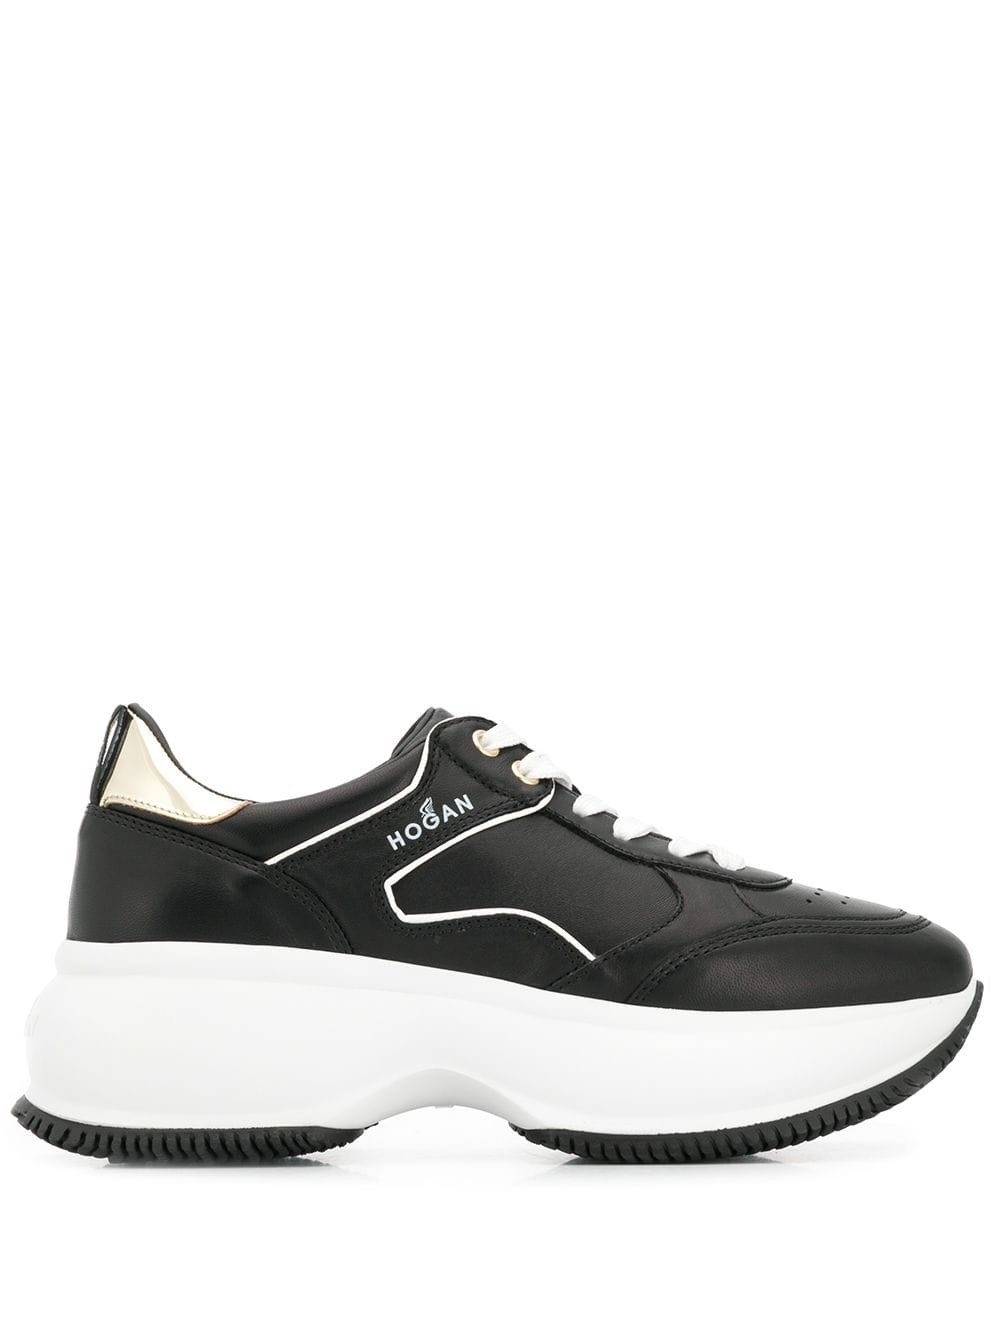 hogan MAXI ACTIVE SNEAKERS available on 